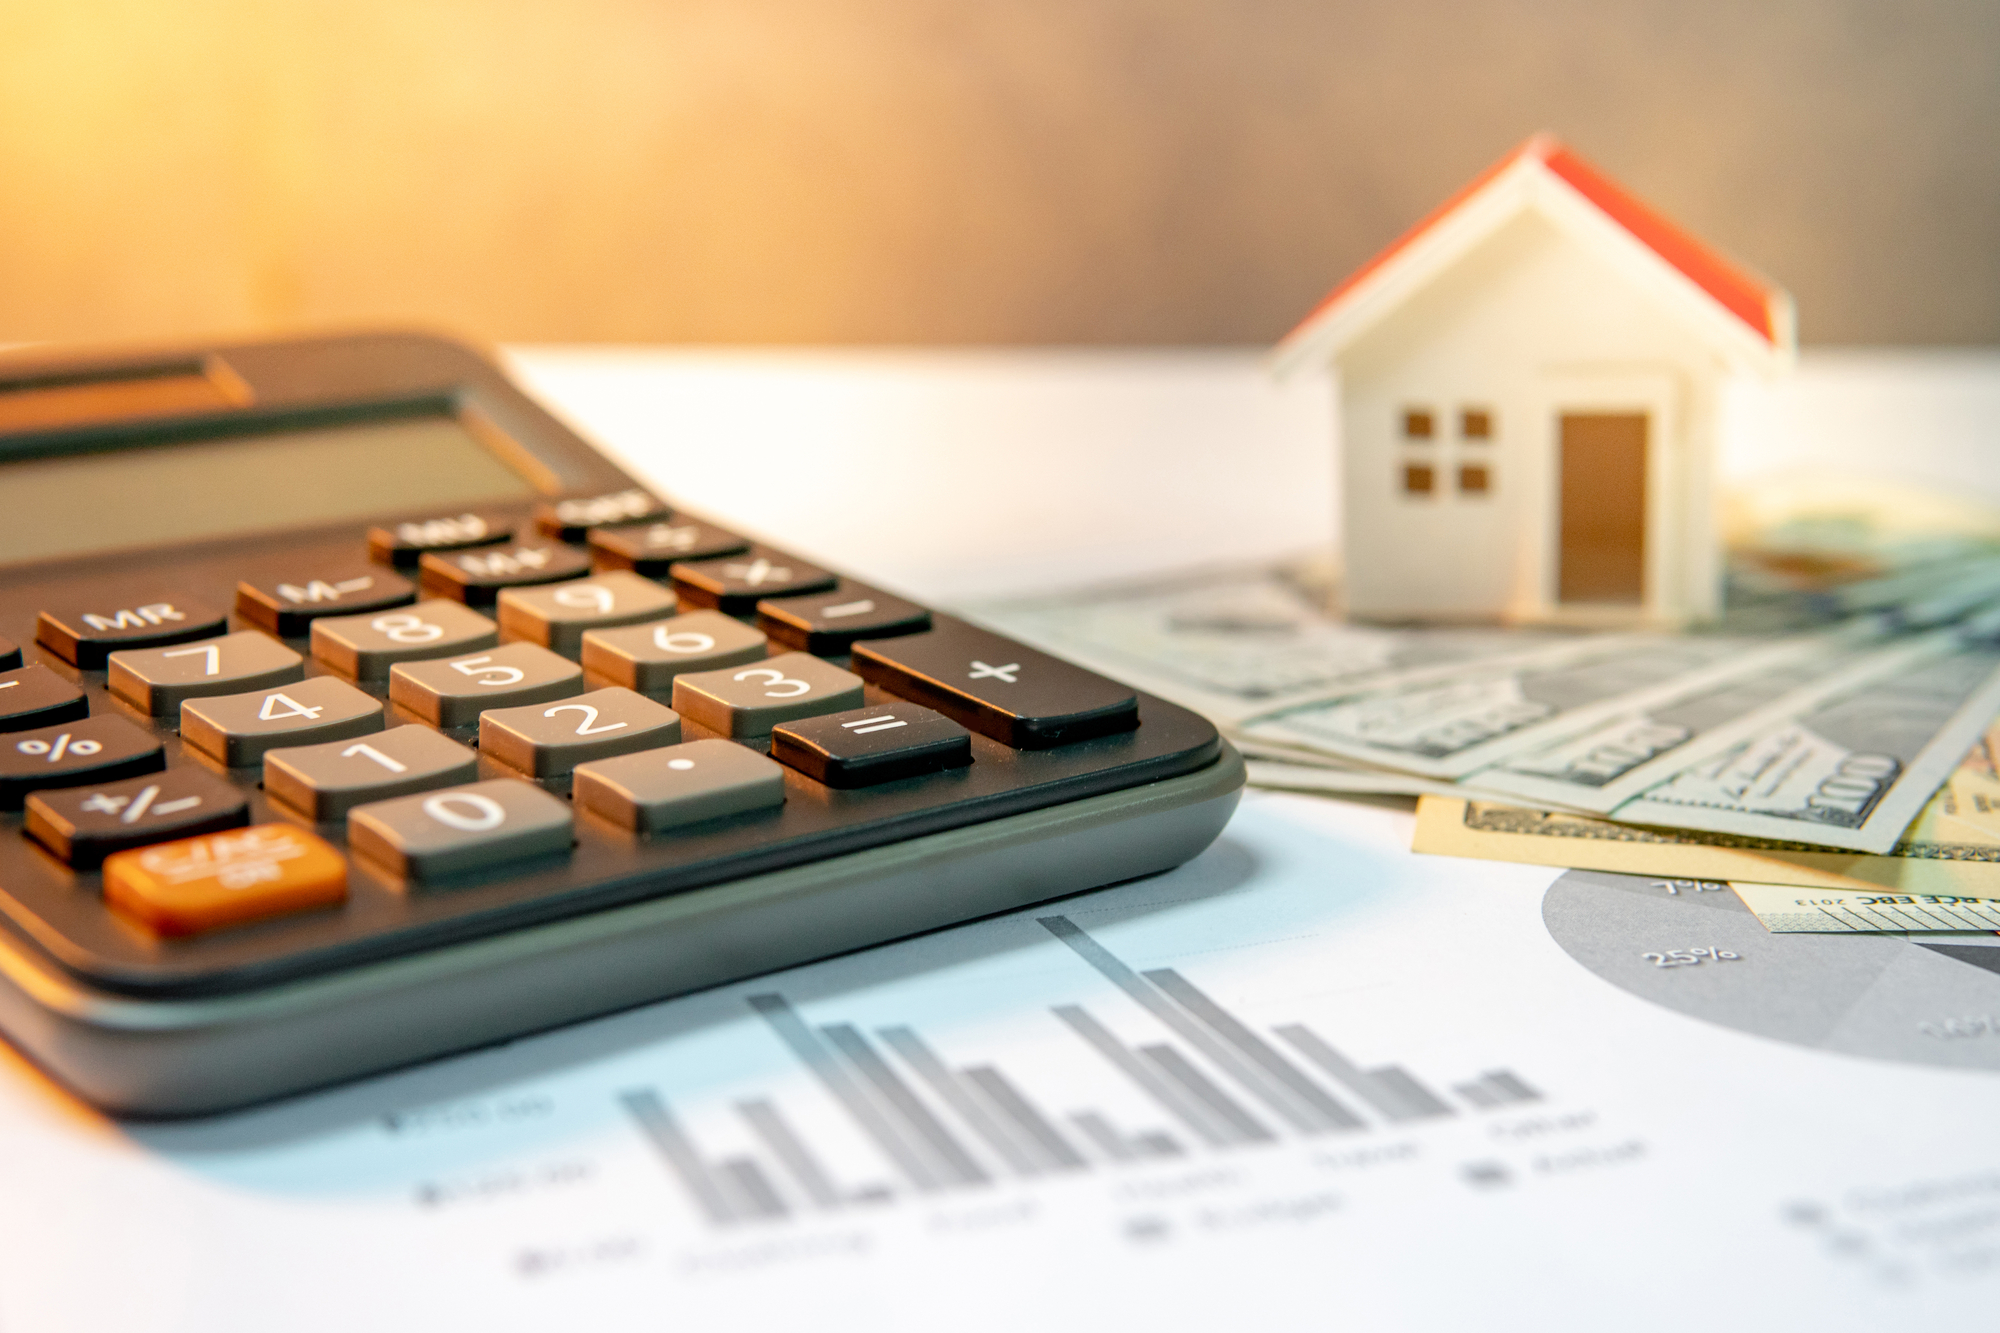 Real estate or property development. Construction business investment concept. Home mortgage loan rate. House model on international banknotes with calculator on the table.